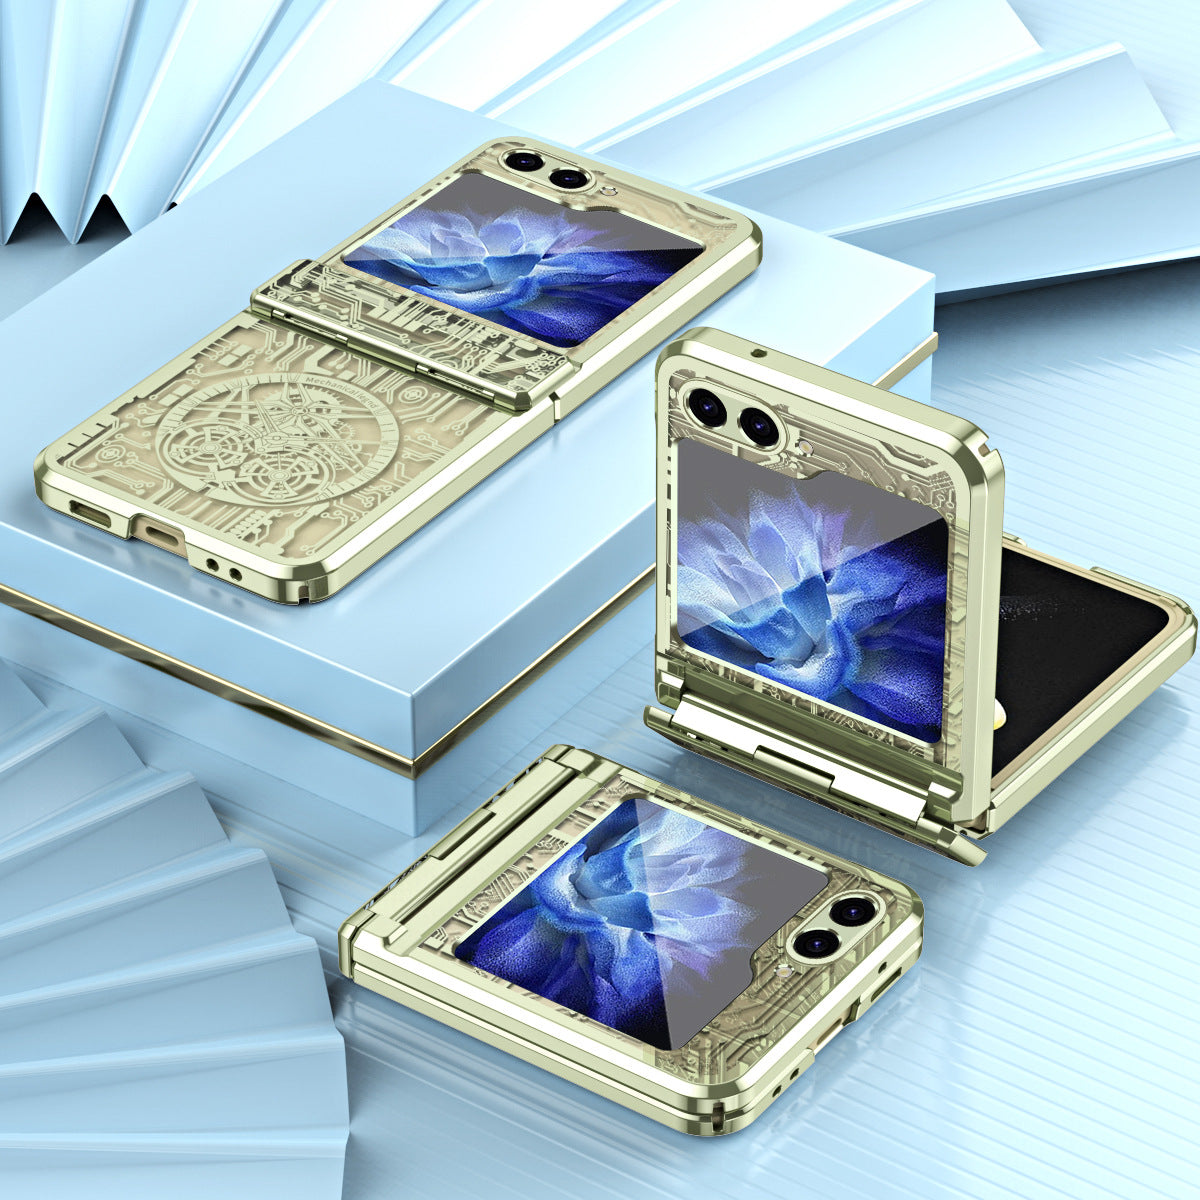 Luxury Electroplated Samsung Flip5 Flip4 Flip3 5G Case All-inclusive Drop-proof Protective Case